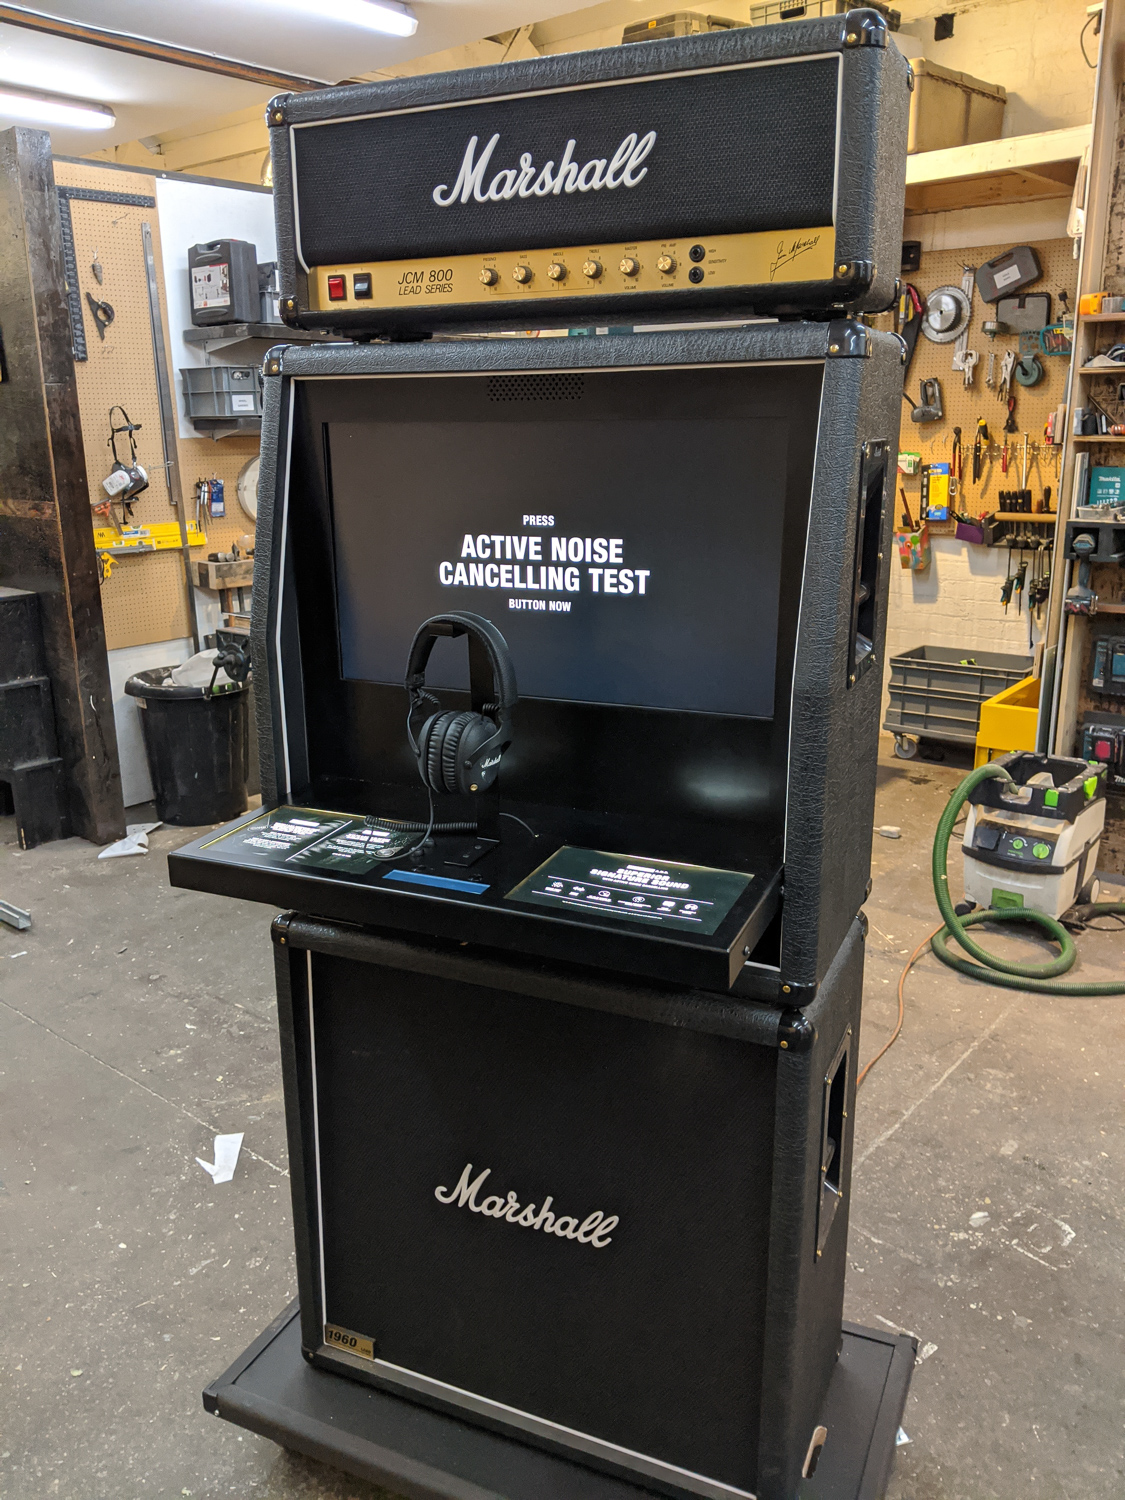 Marshall Kiosk, Transformed into multi-media kiosk. All display surround, housing, fixings custom designed and fabricated in-house.
